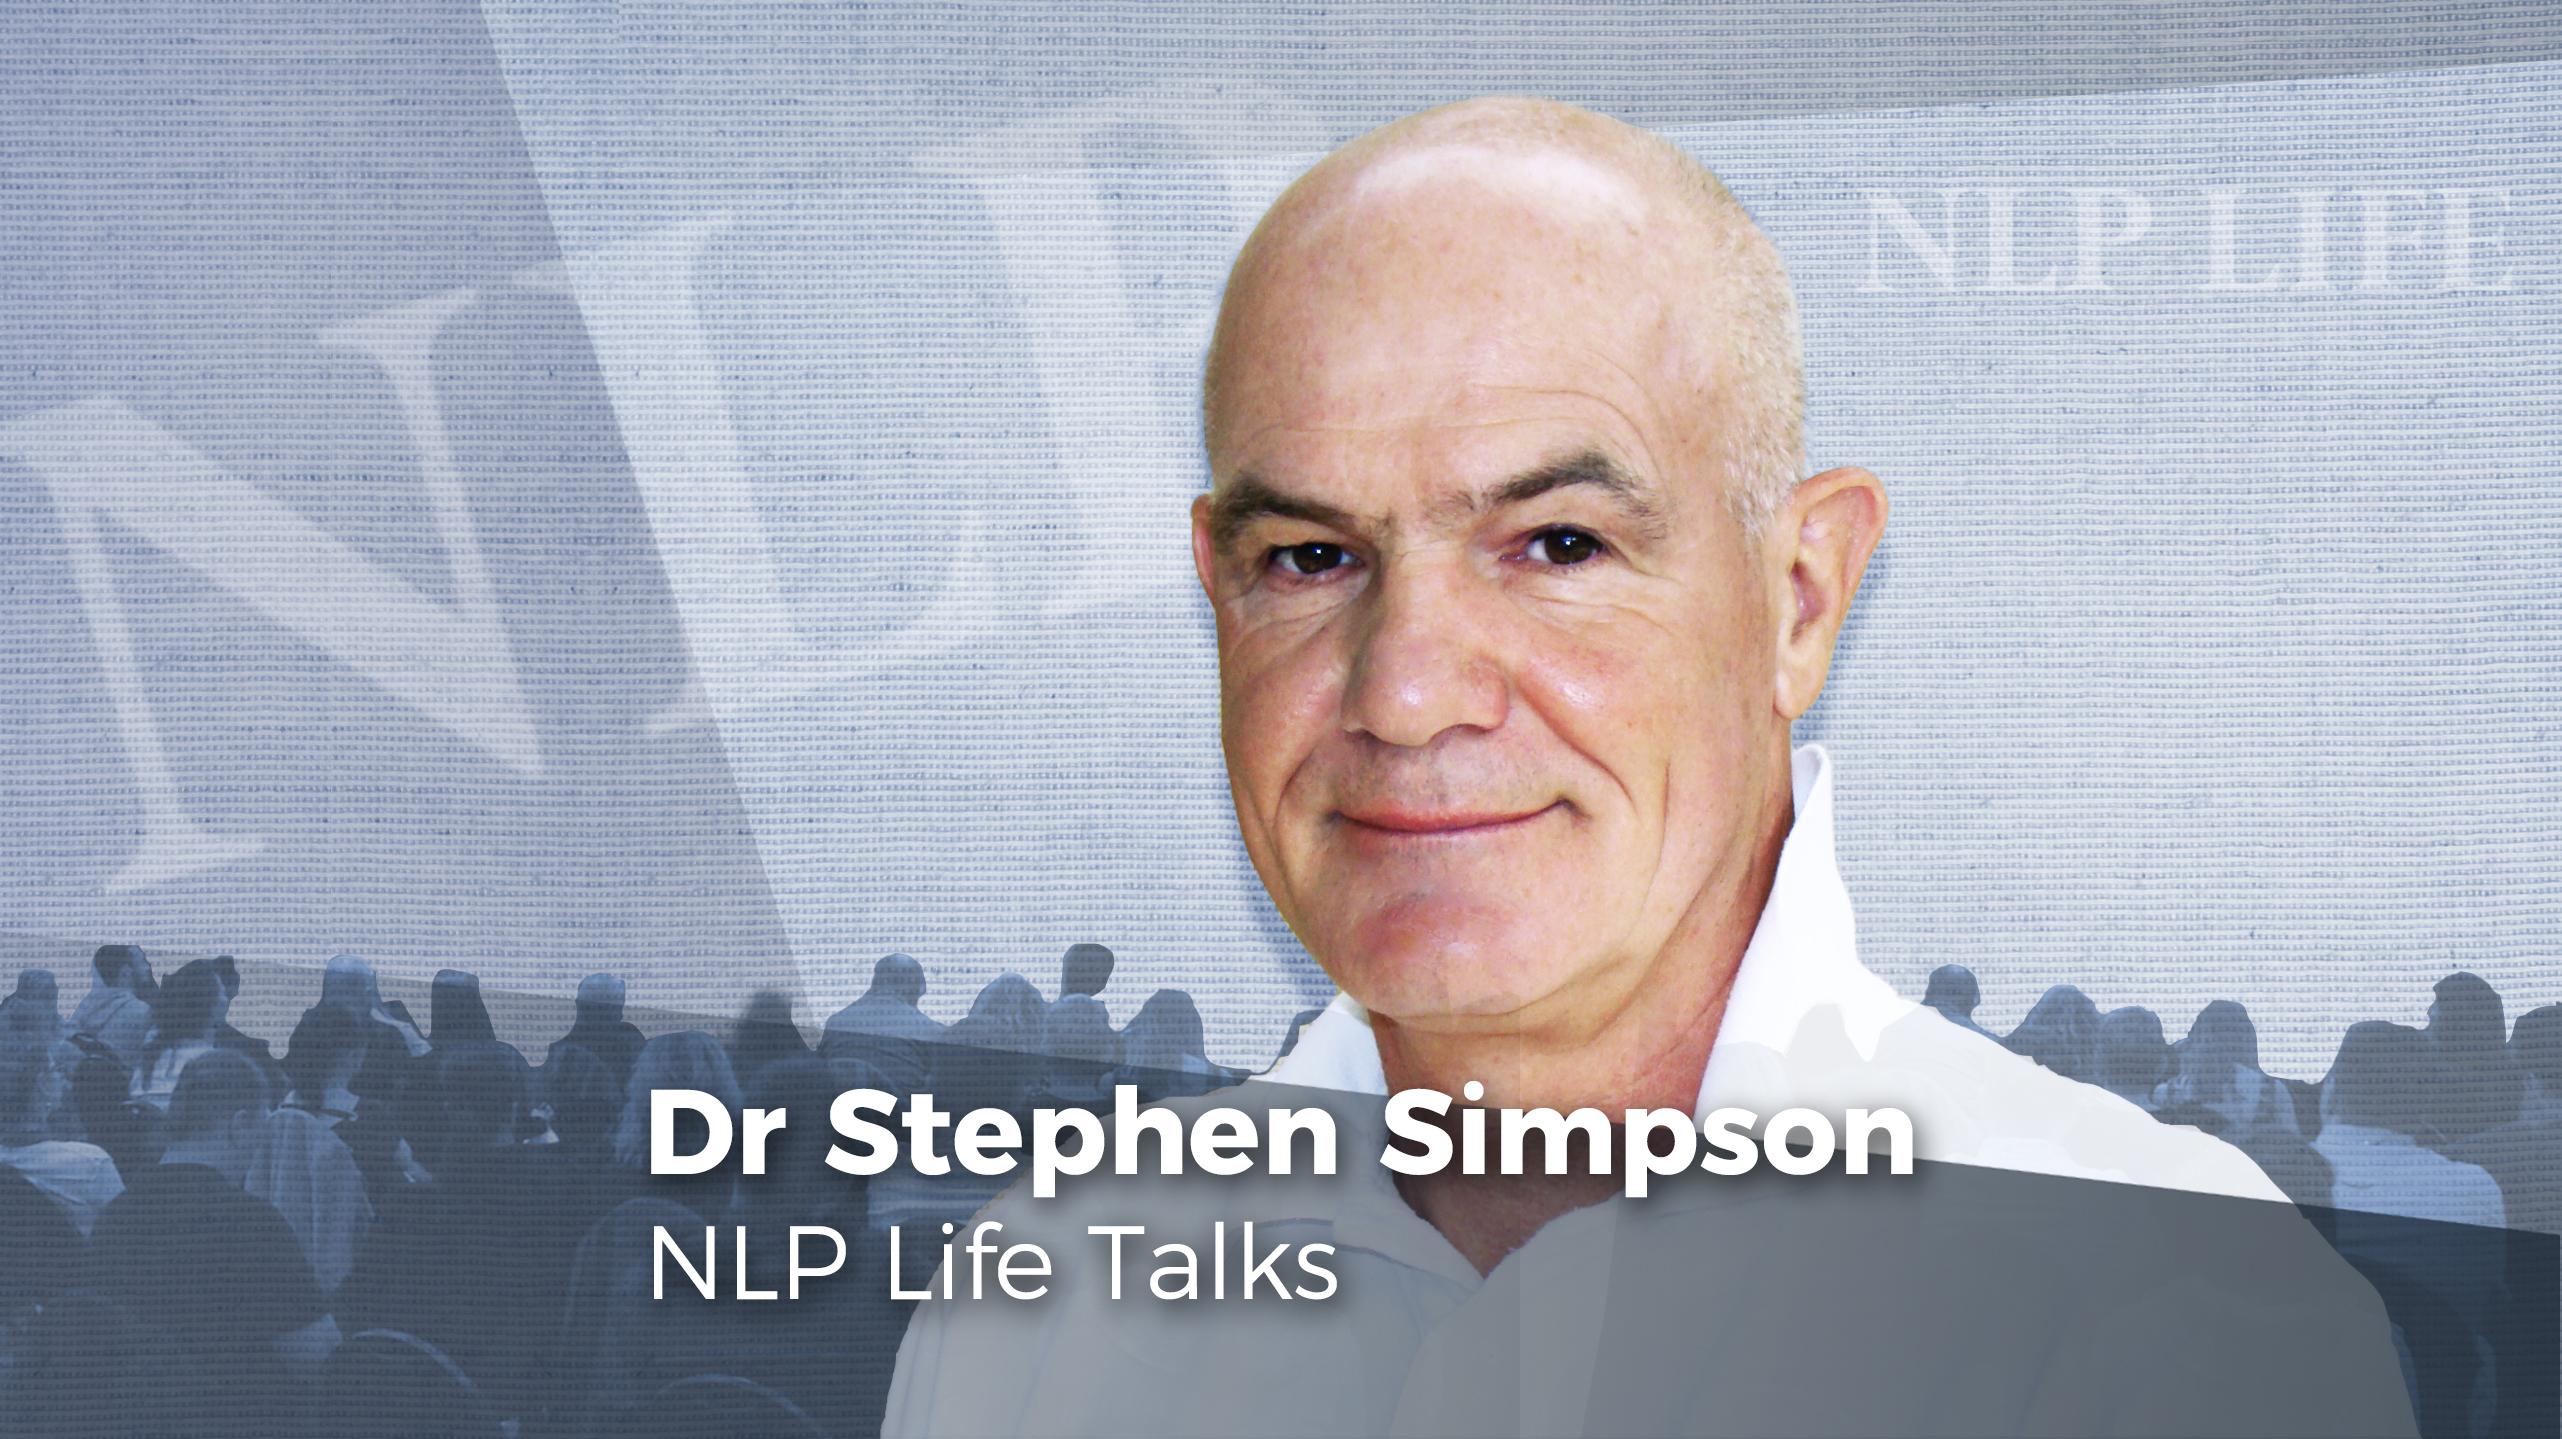 Talk by Dr Stephen Simpson